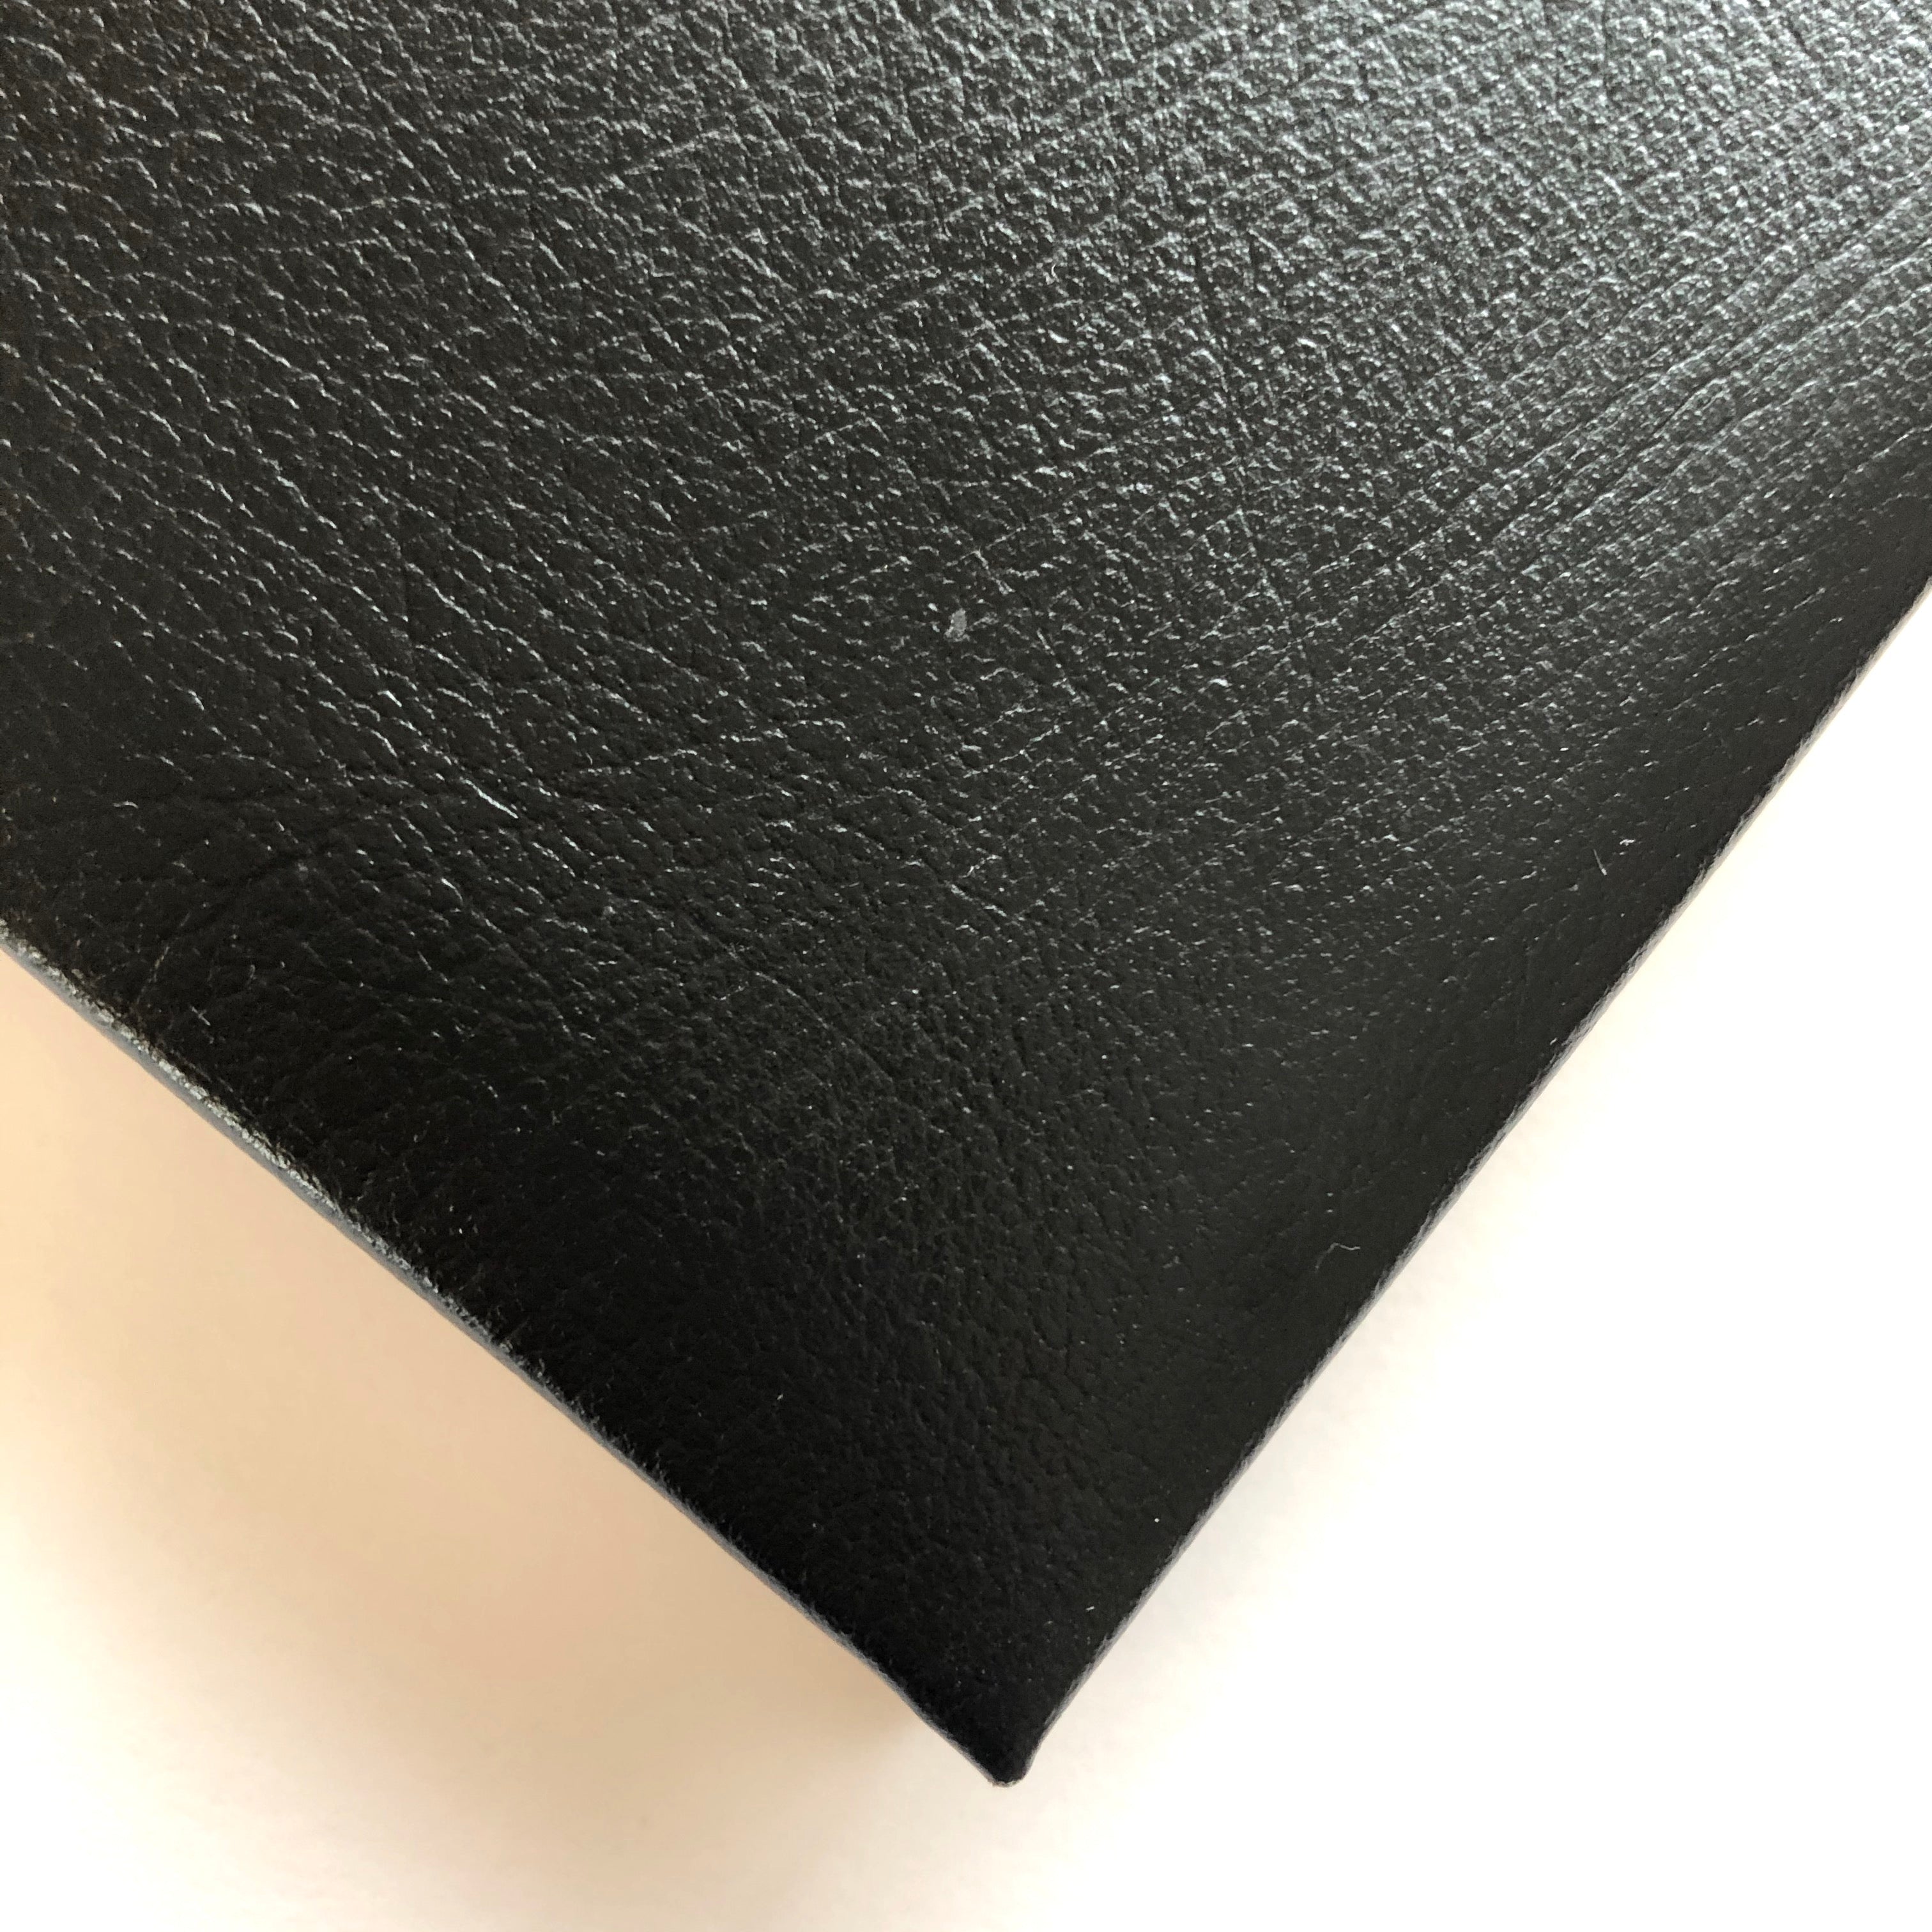 Swatch of Black Leather Visitors Book